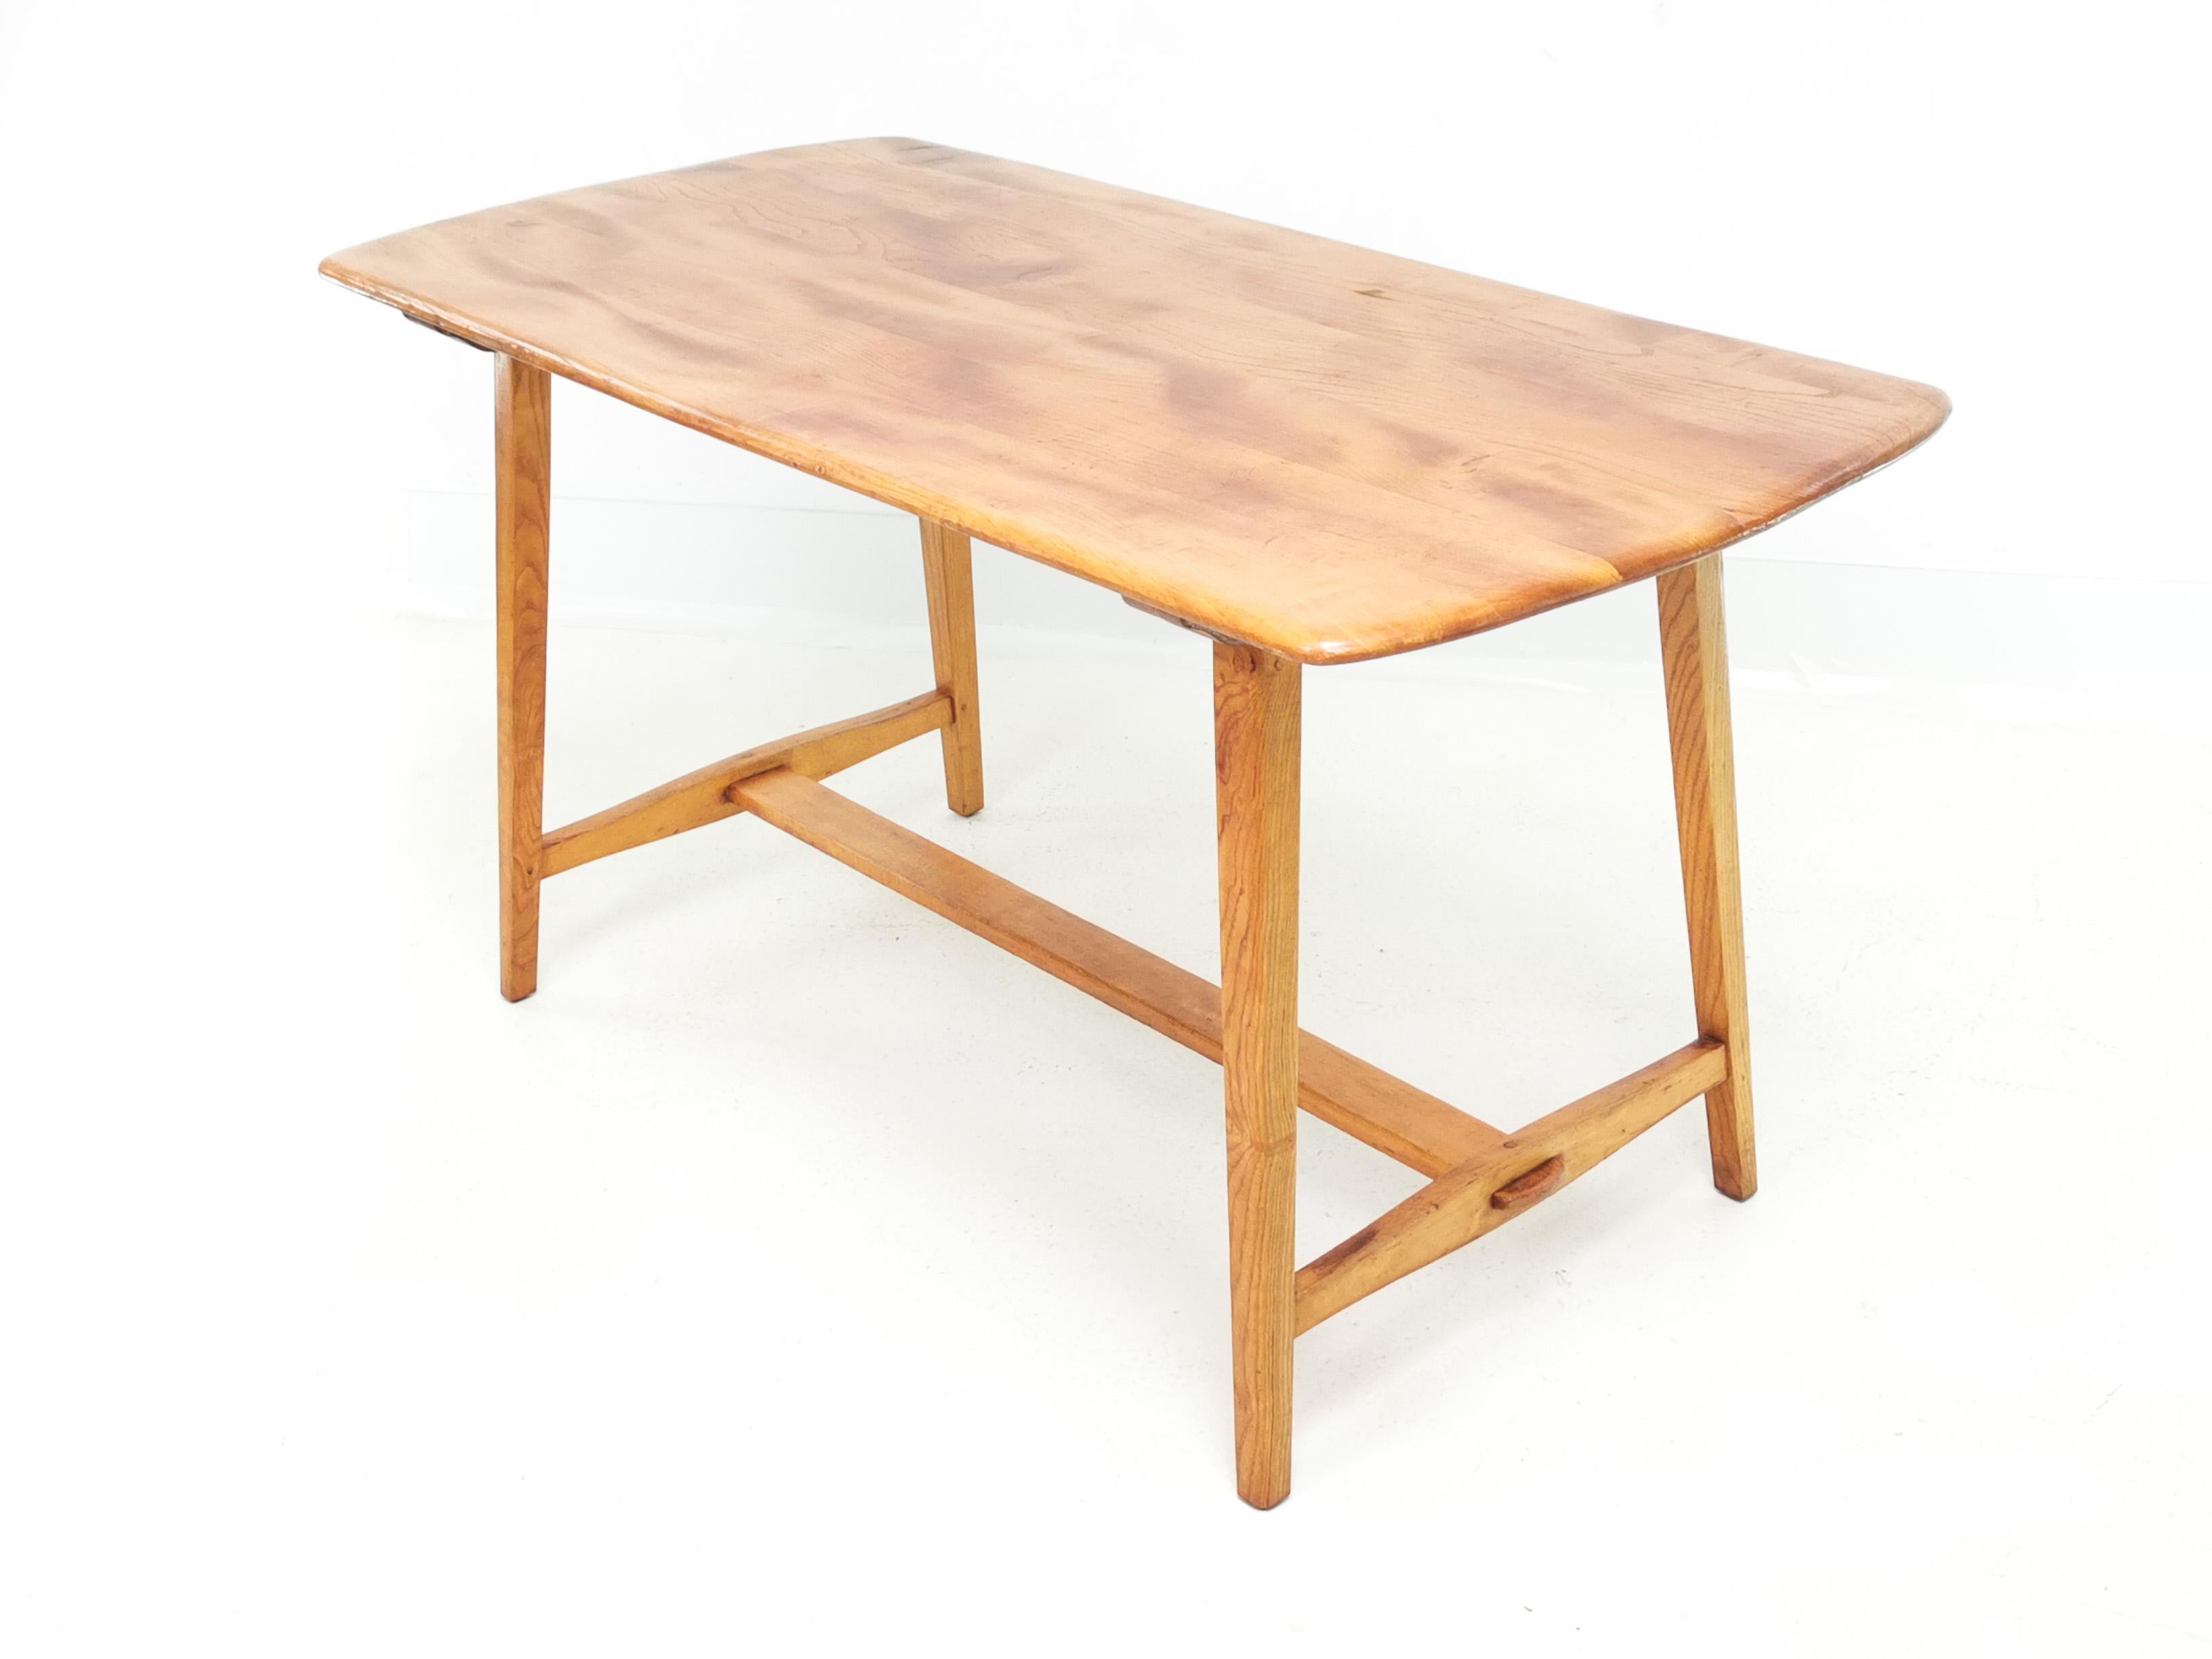 20th Century Beech and Elm CC41 Ercol Utility Mid Century Dining Table